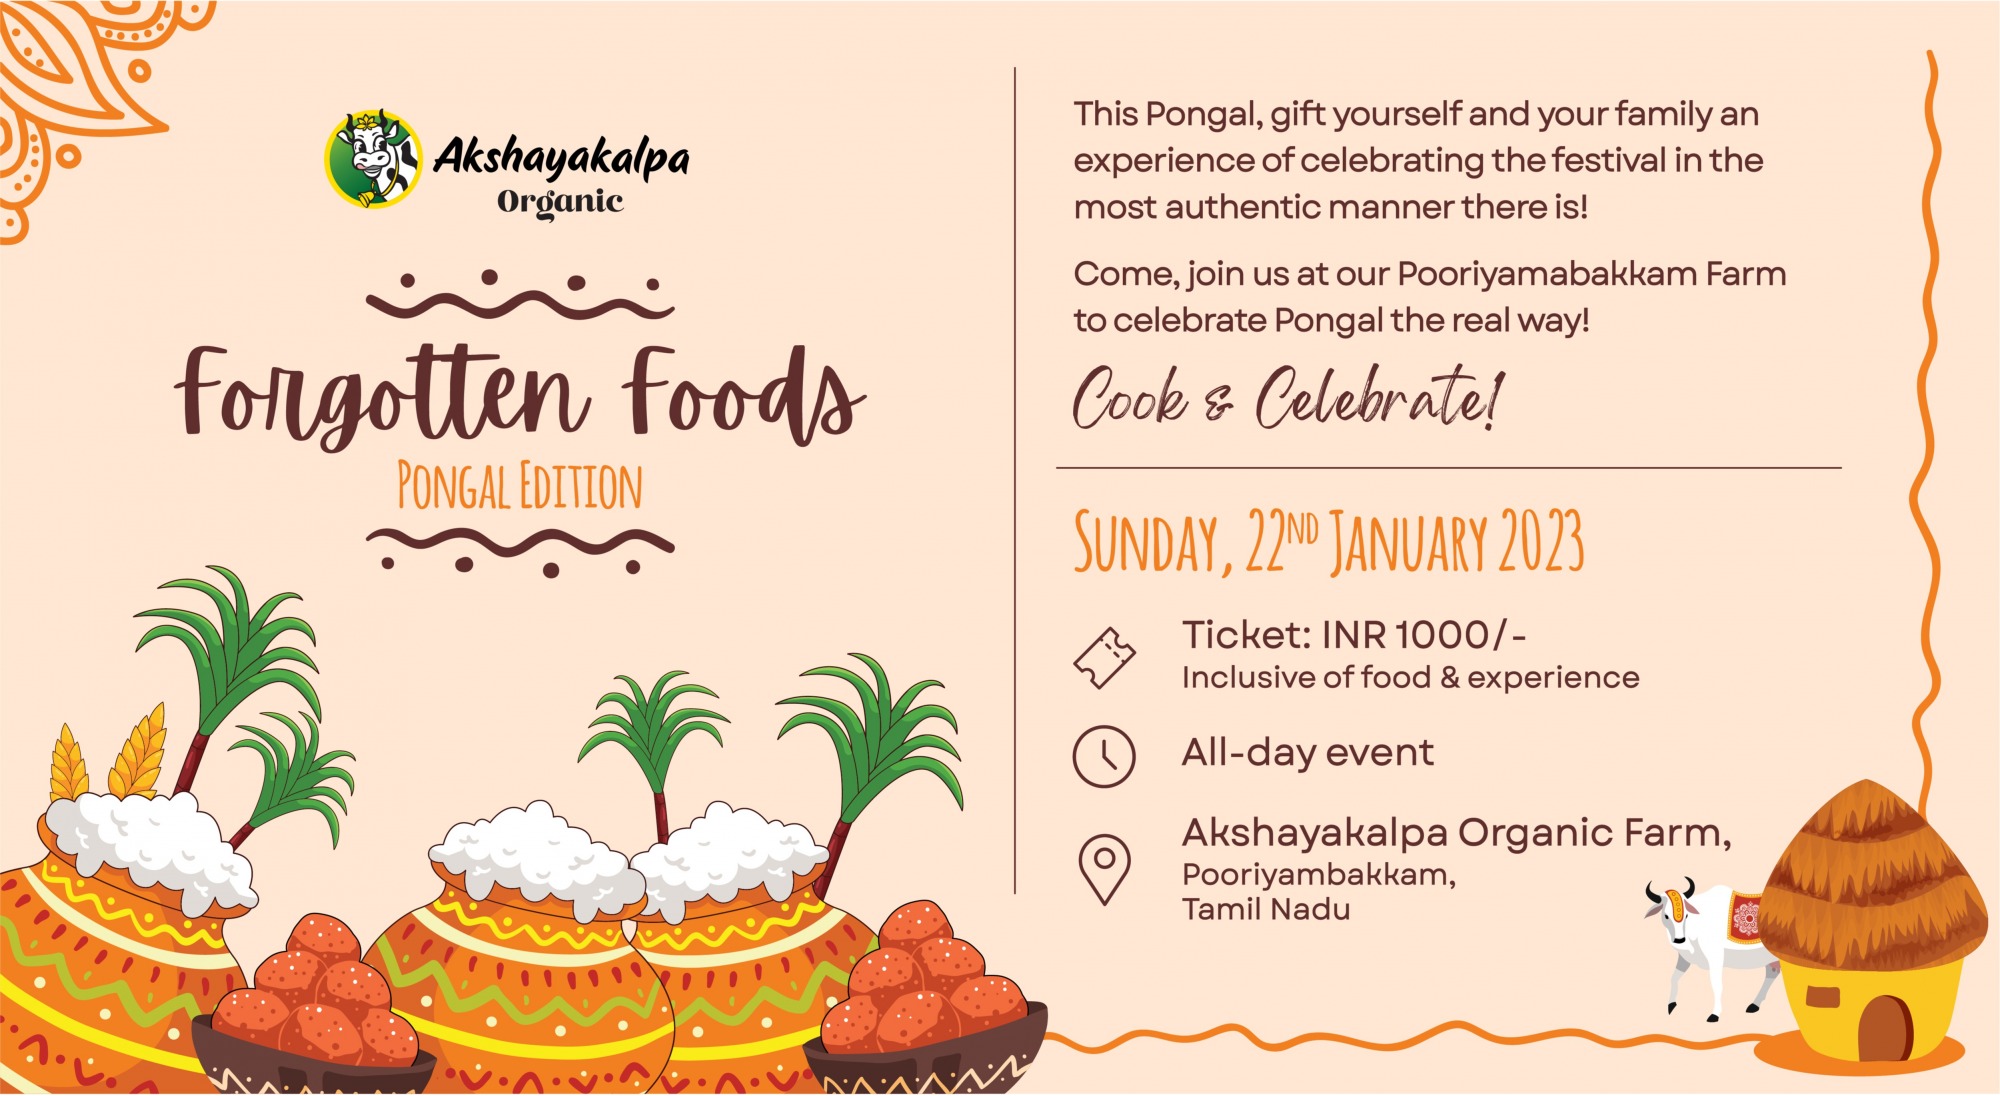 Forgotten Foods - Pongal Edition, Forgotten Foods - Pongal Edition